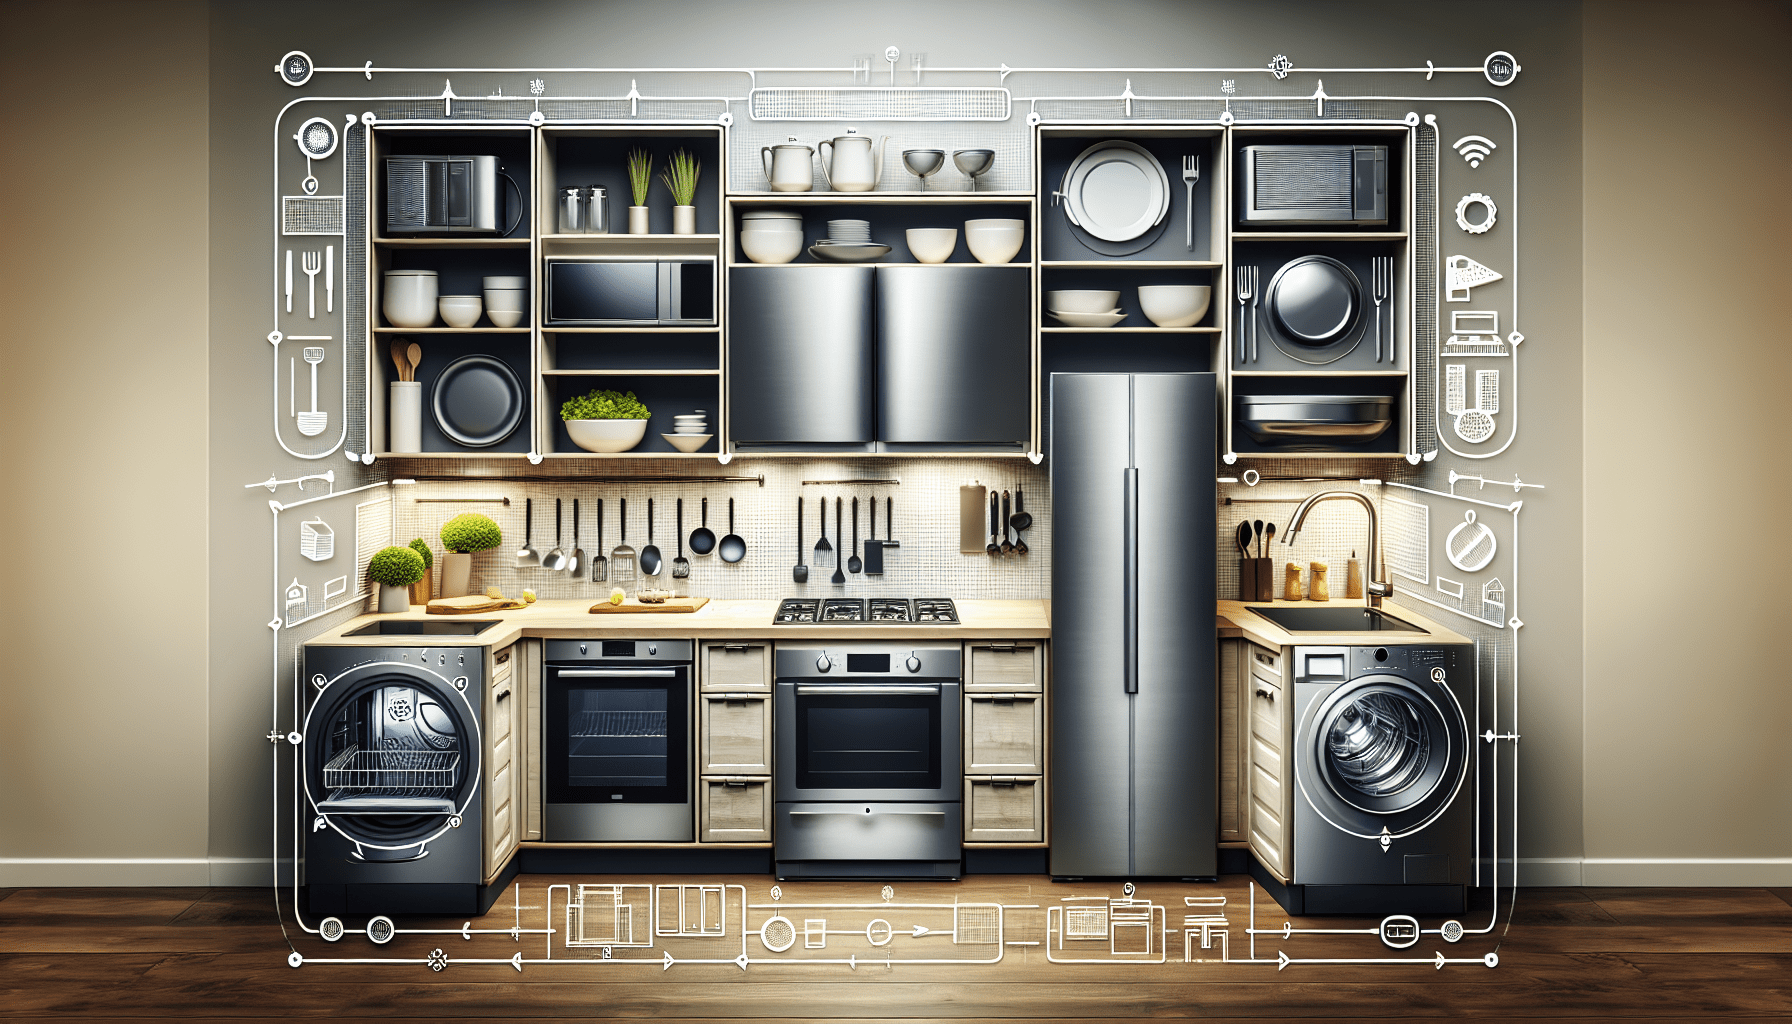 Where Should Appliances Be Placed In A Kitchen?